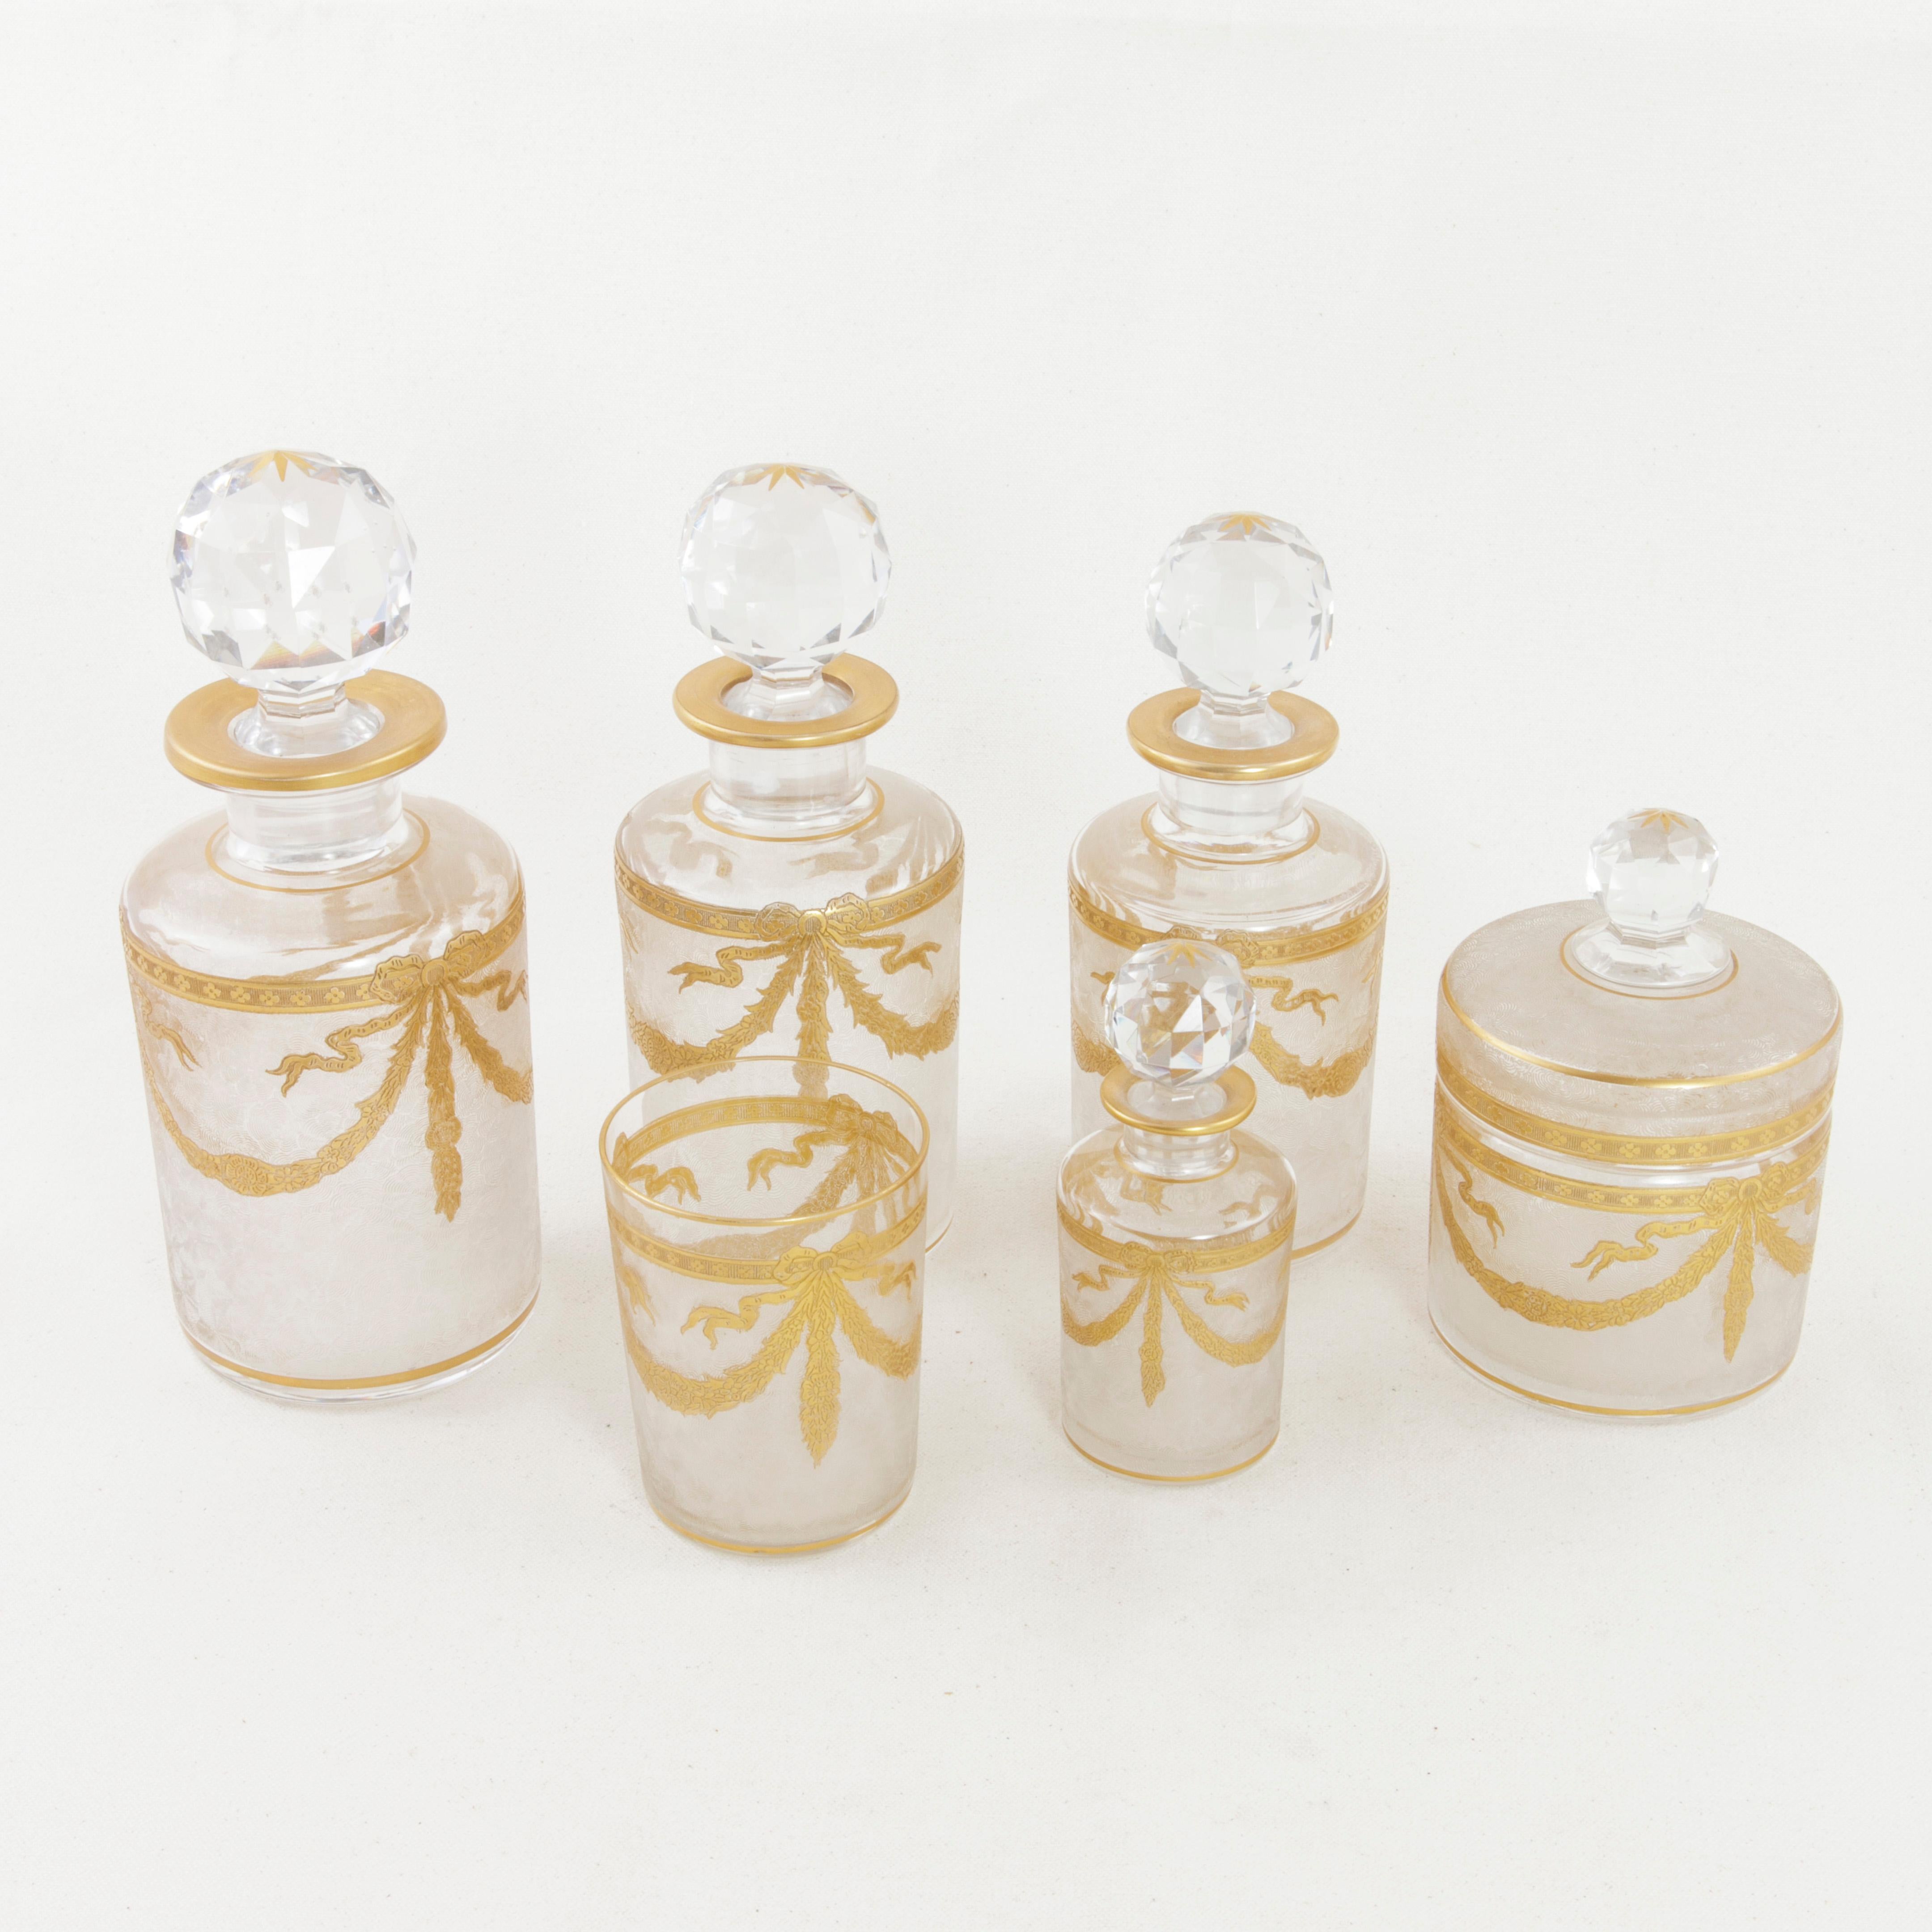 This set of six early 20th century French baccarat crystal vanity bottles features Classic Louis XVI style gold detailing. Gold garlands and knotted ribbons surround each bottle, and gold rims encircle the opening for the cut crystal stoppers. This